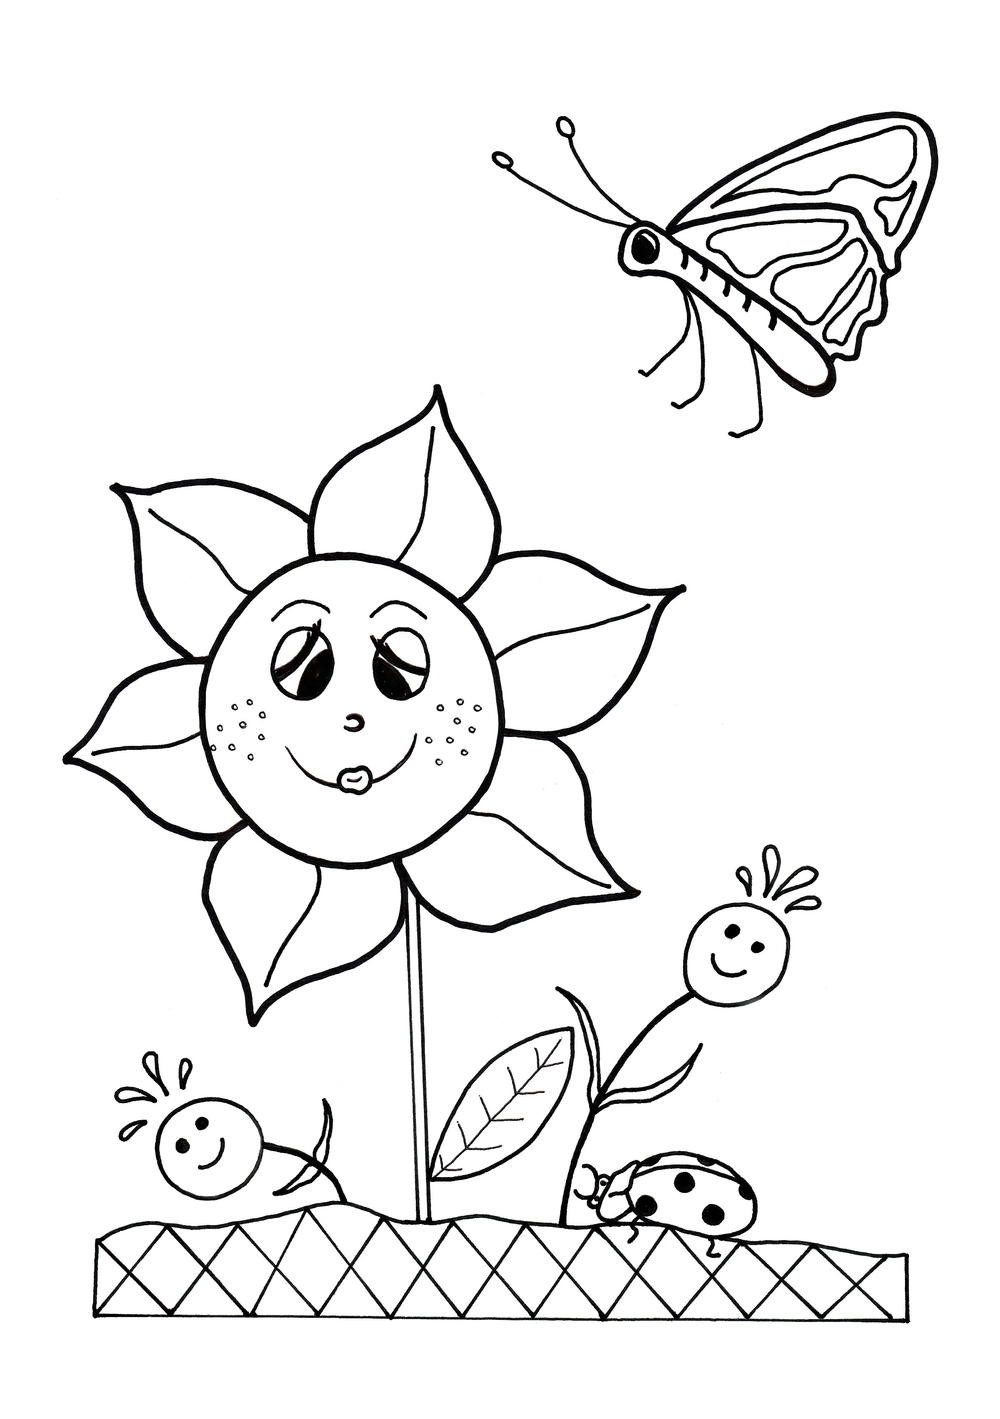 Spring Coloring Pages Free Printable
 Dancing Flowers Spring Coloring Sheet